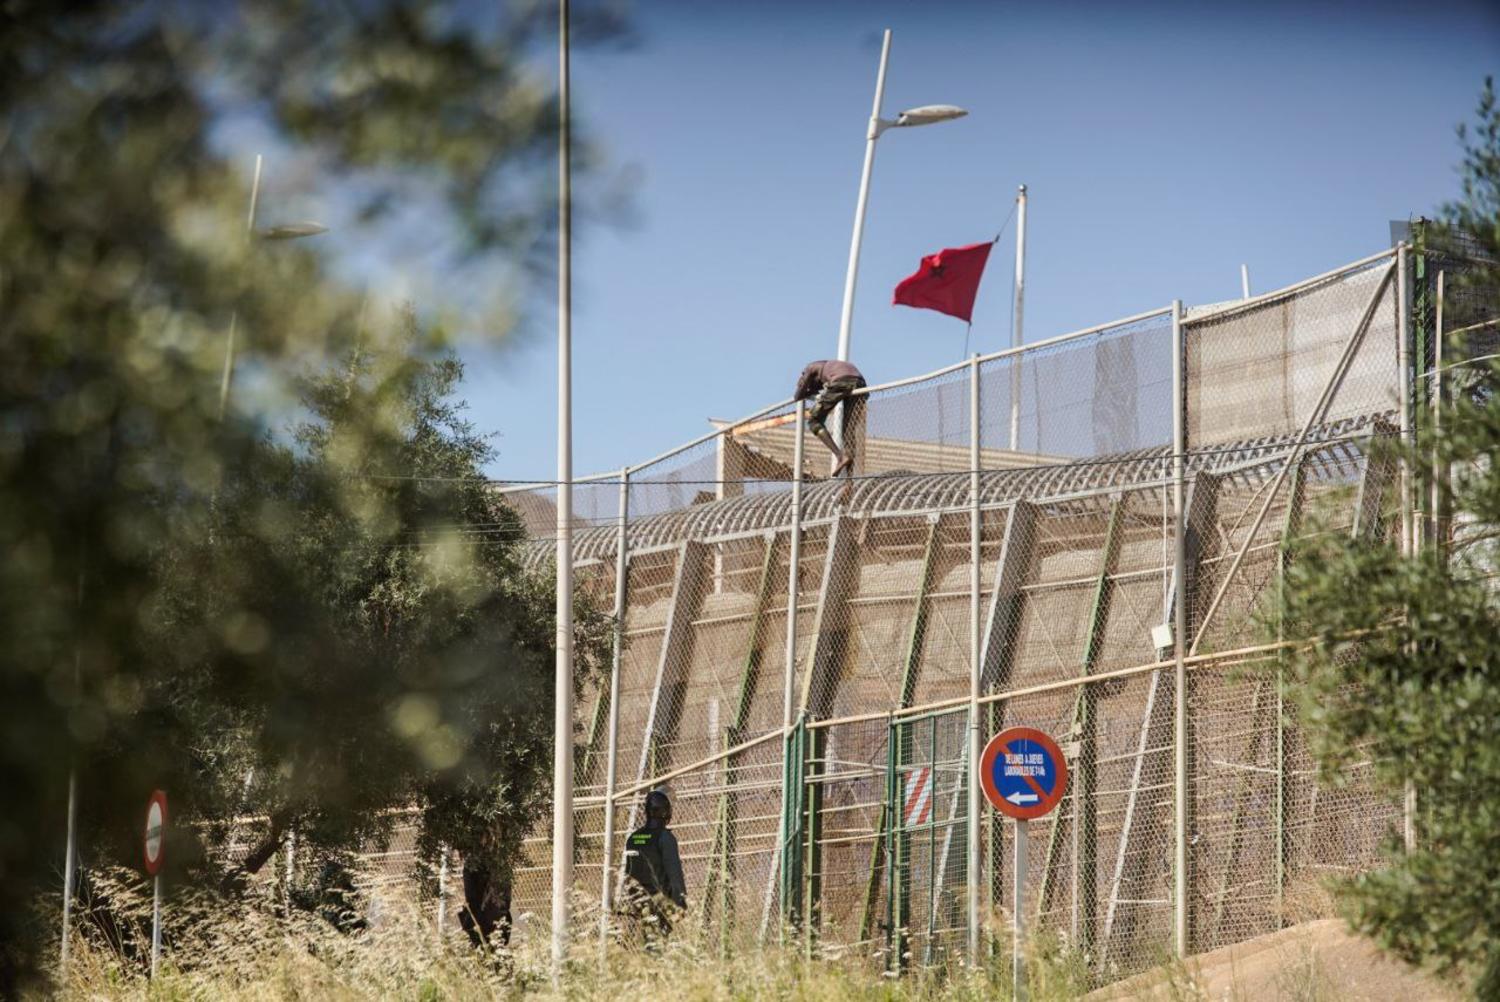 A man trying to jump the border fence in the Spanish colonial enclave of Melilla in Morocco. Photo: Javier Bernardo.